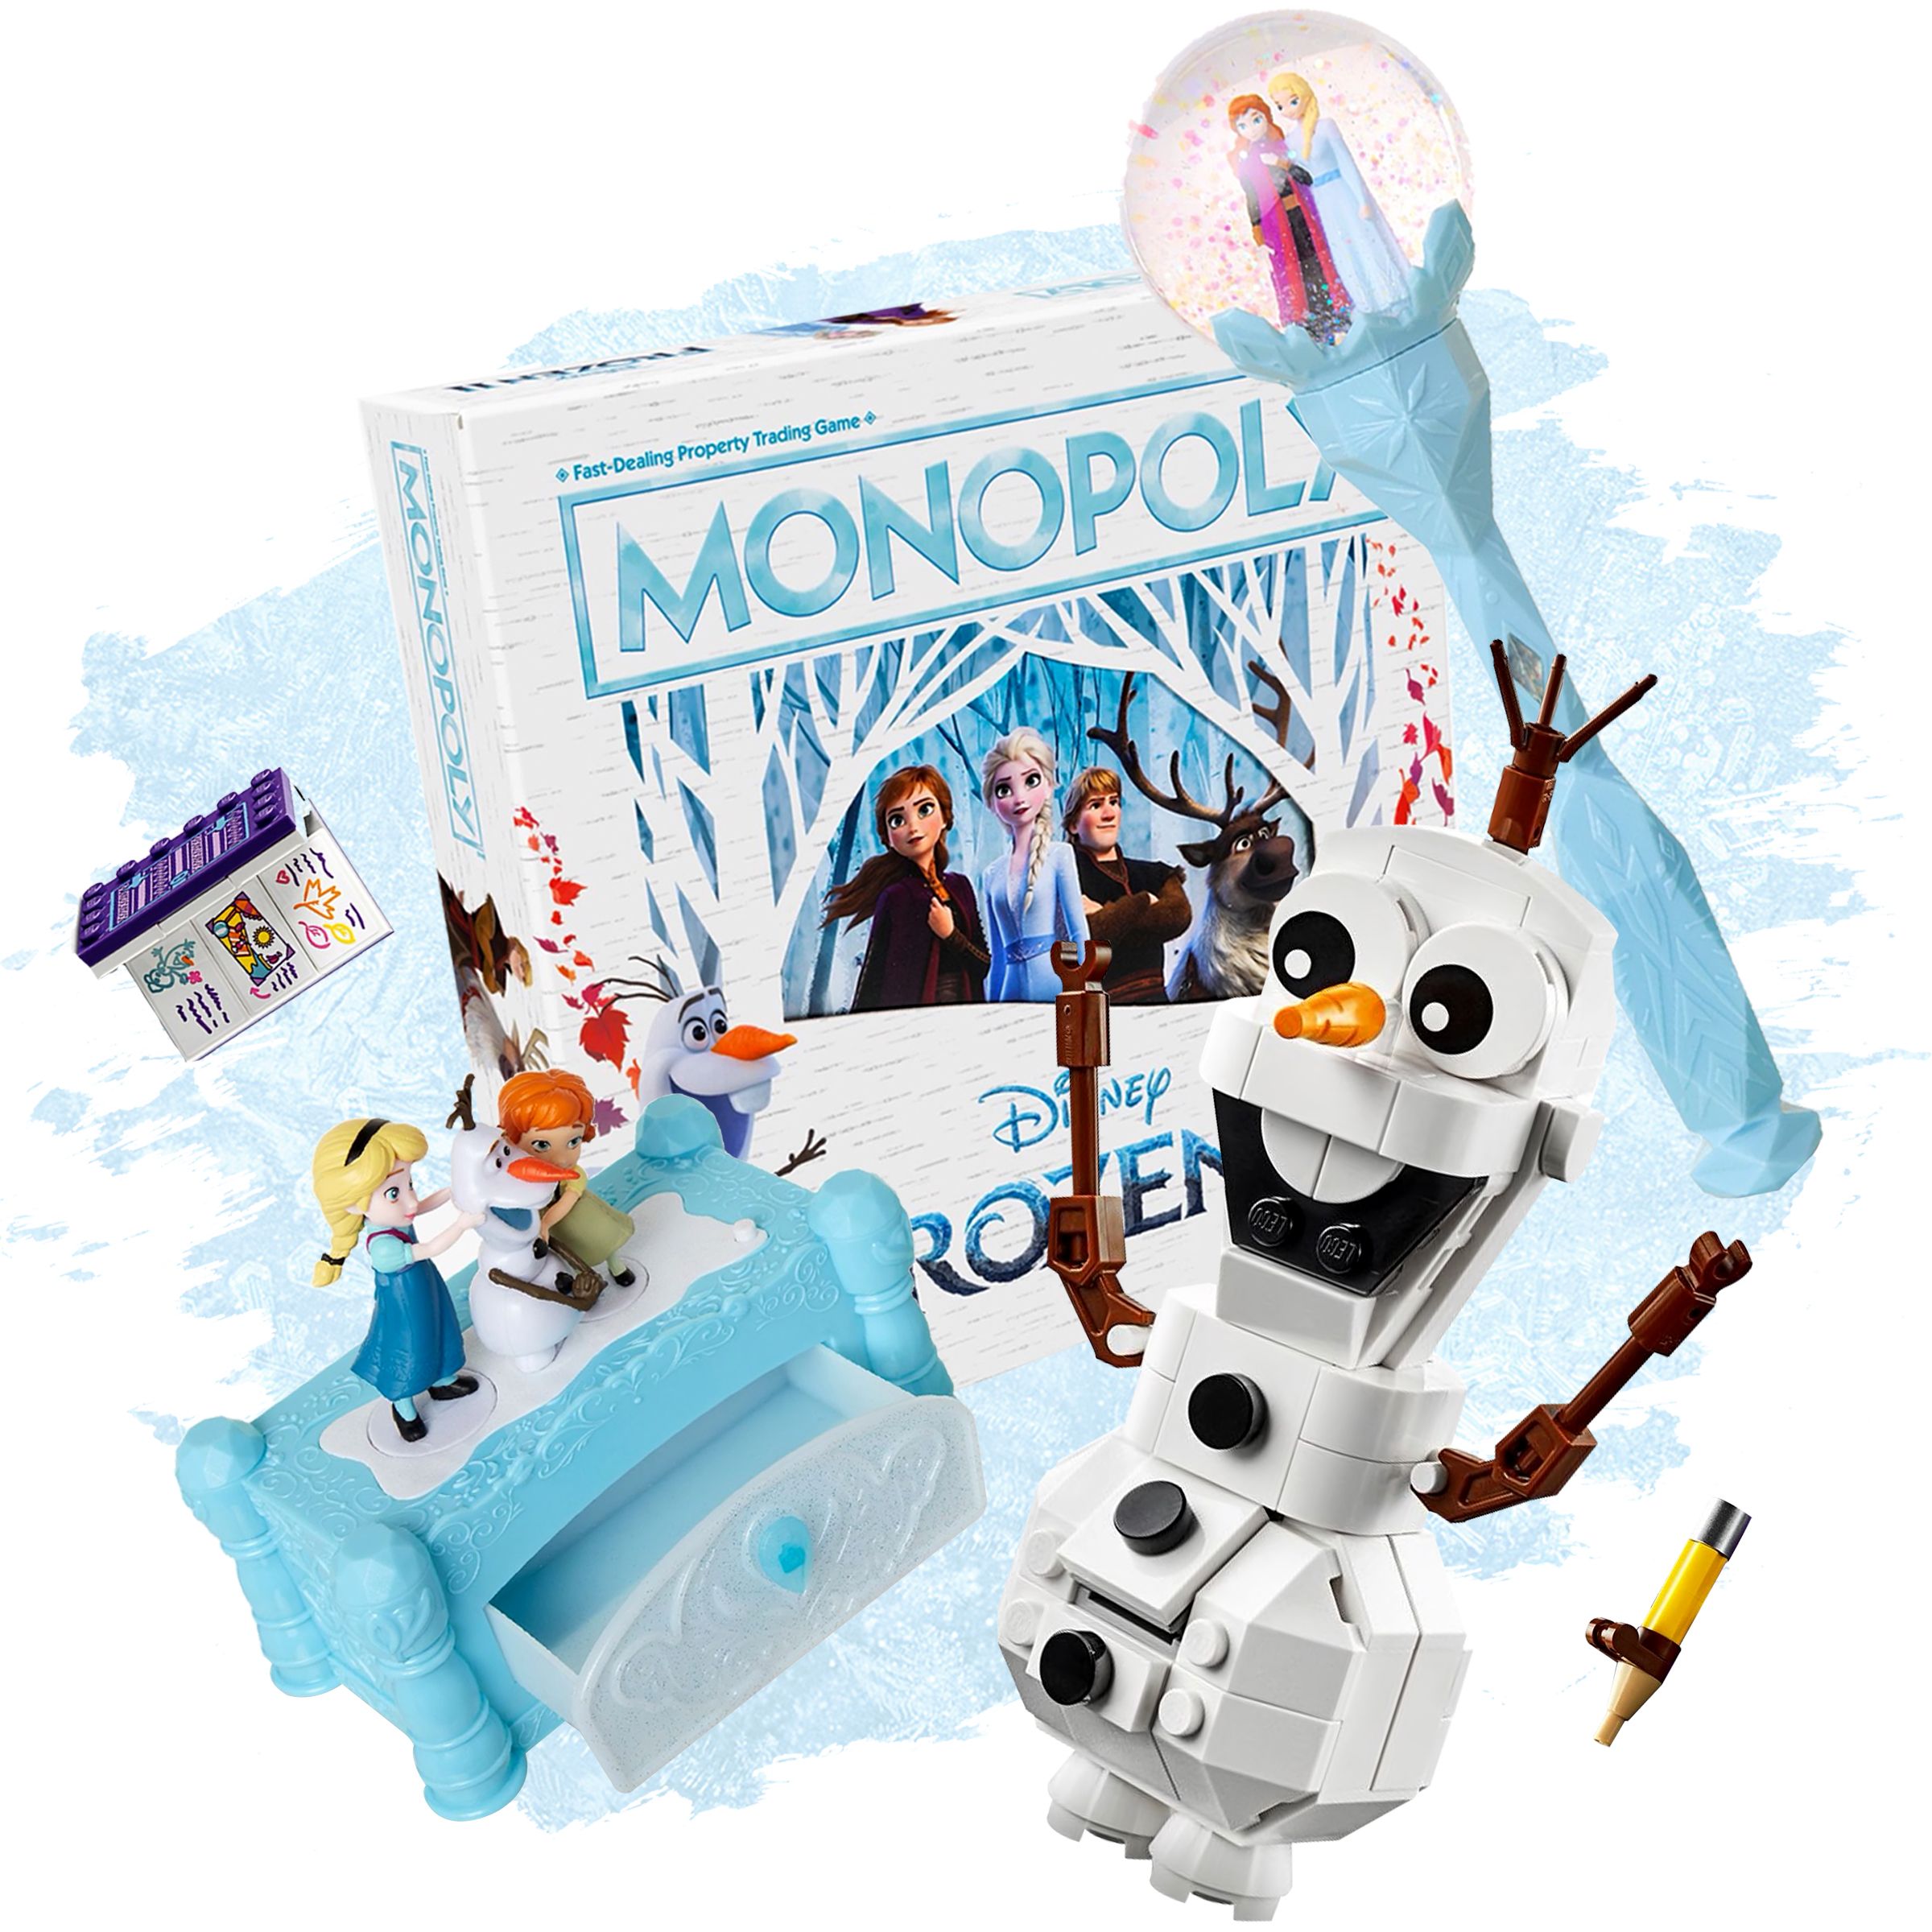 Celebrate the launch of Frozen 2 with a range of toys and clothing